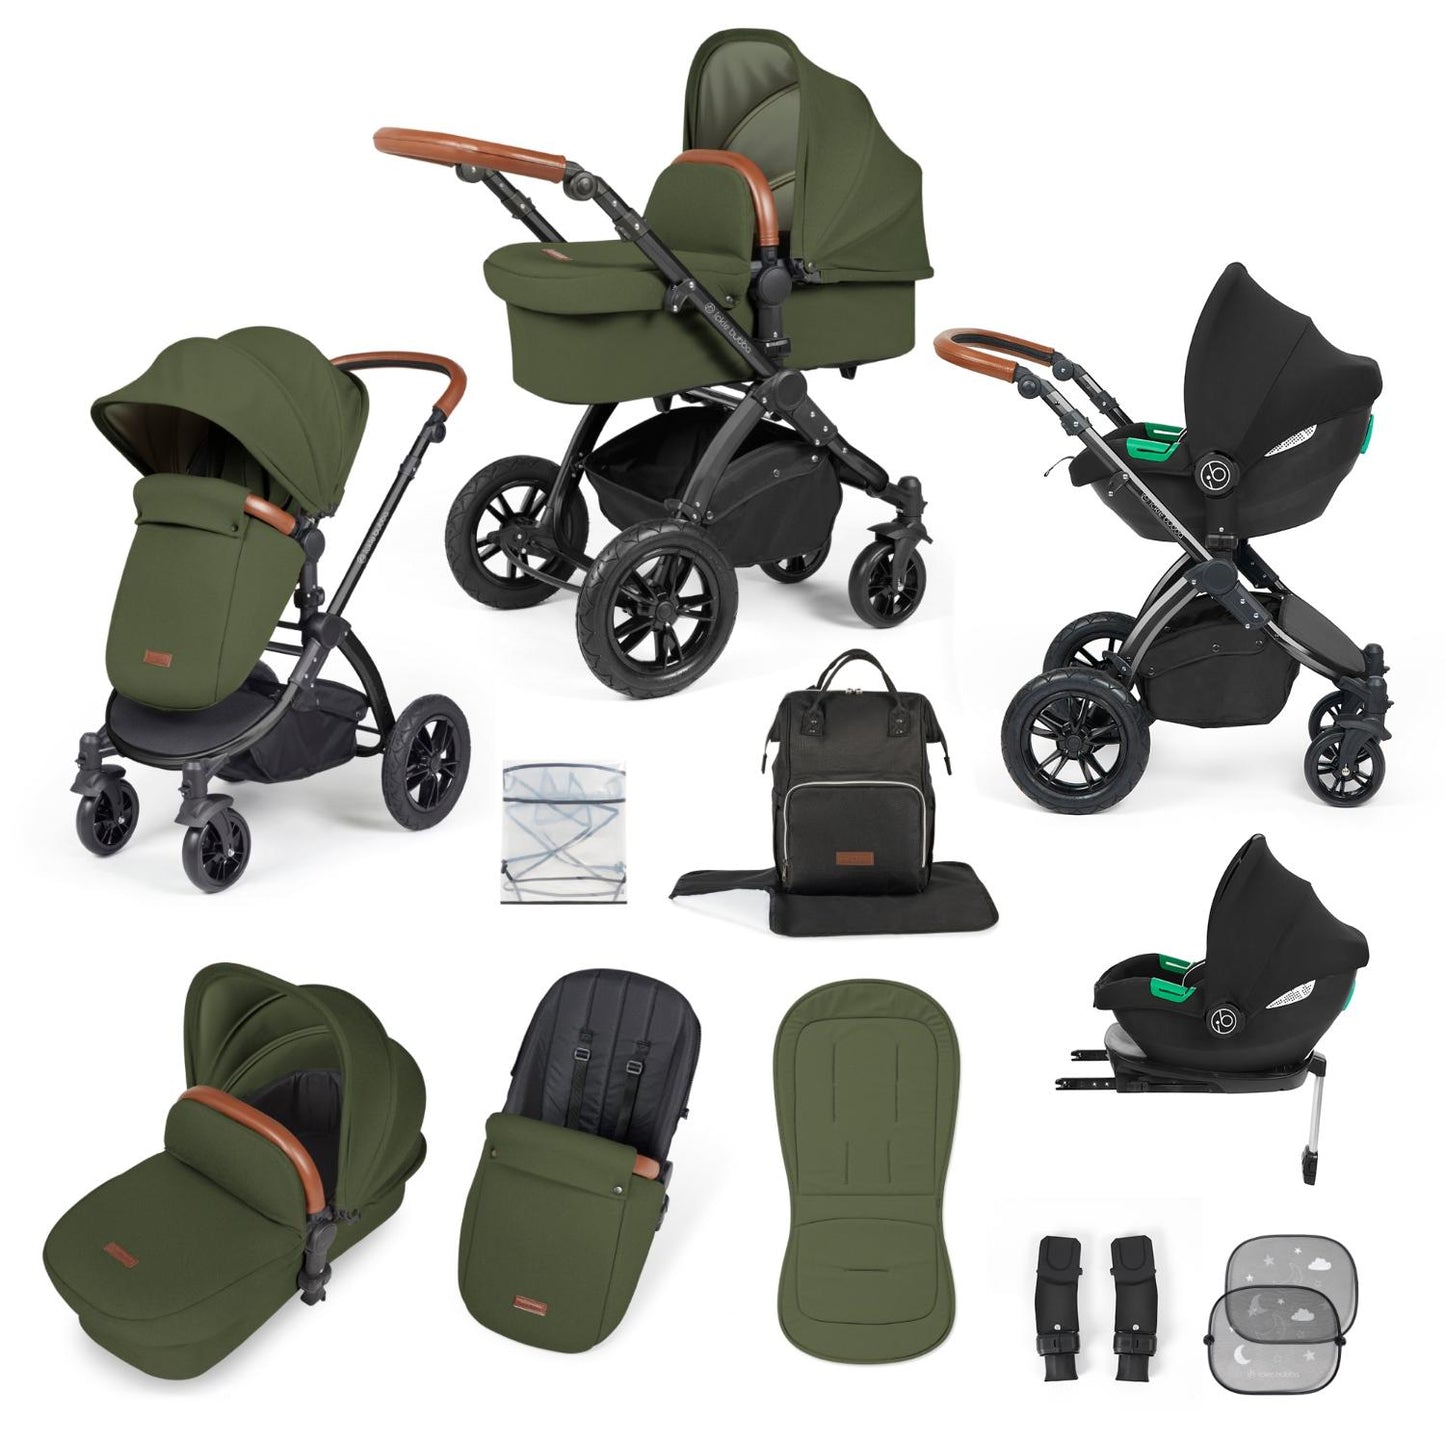 Ickle Bubba Stomp Luxe All-in-One Travel System with Cirrus i-Size Car Seat and ISOFIX Base and accessories in Woodland green colour with tan handle